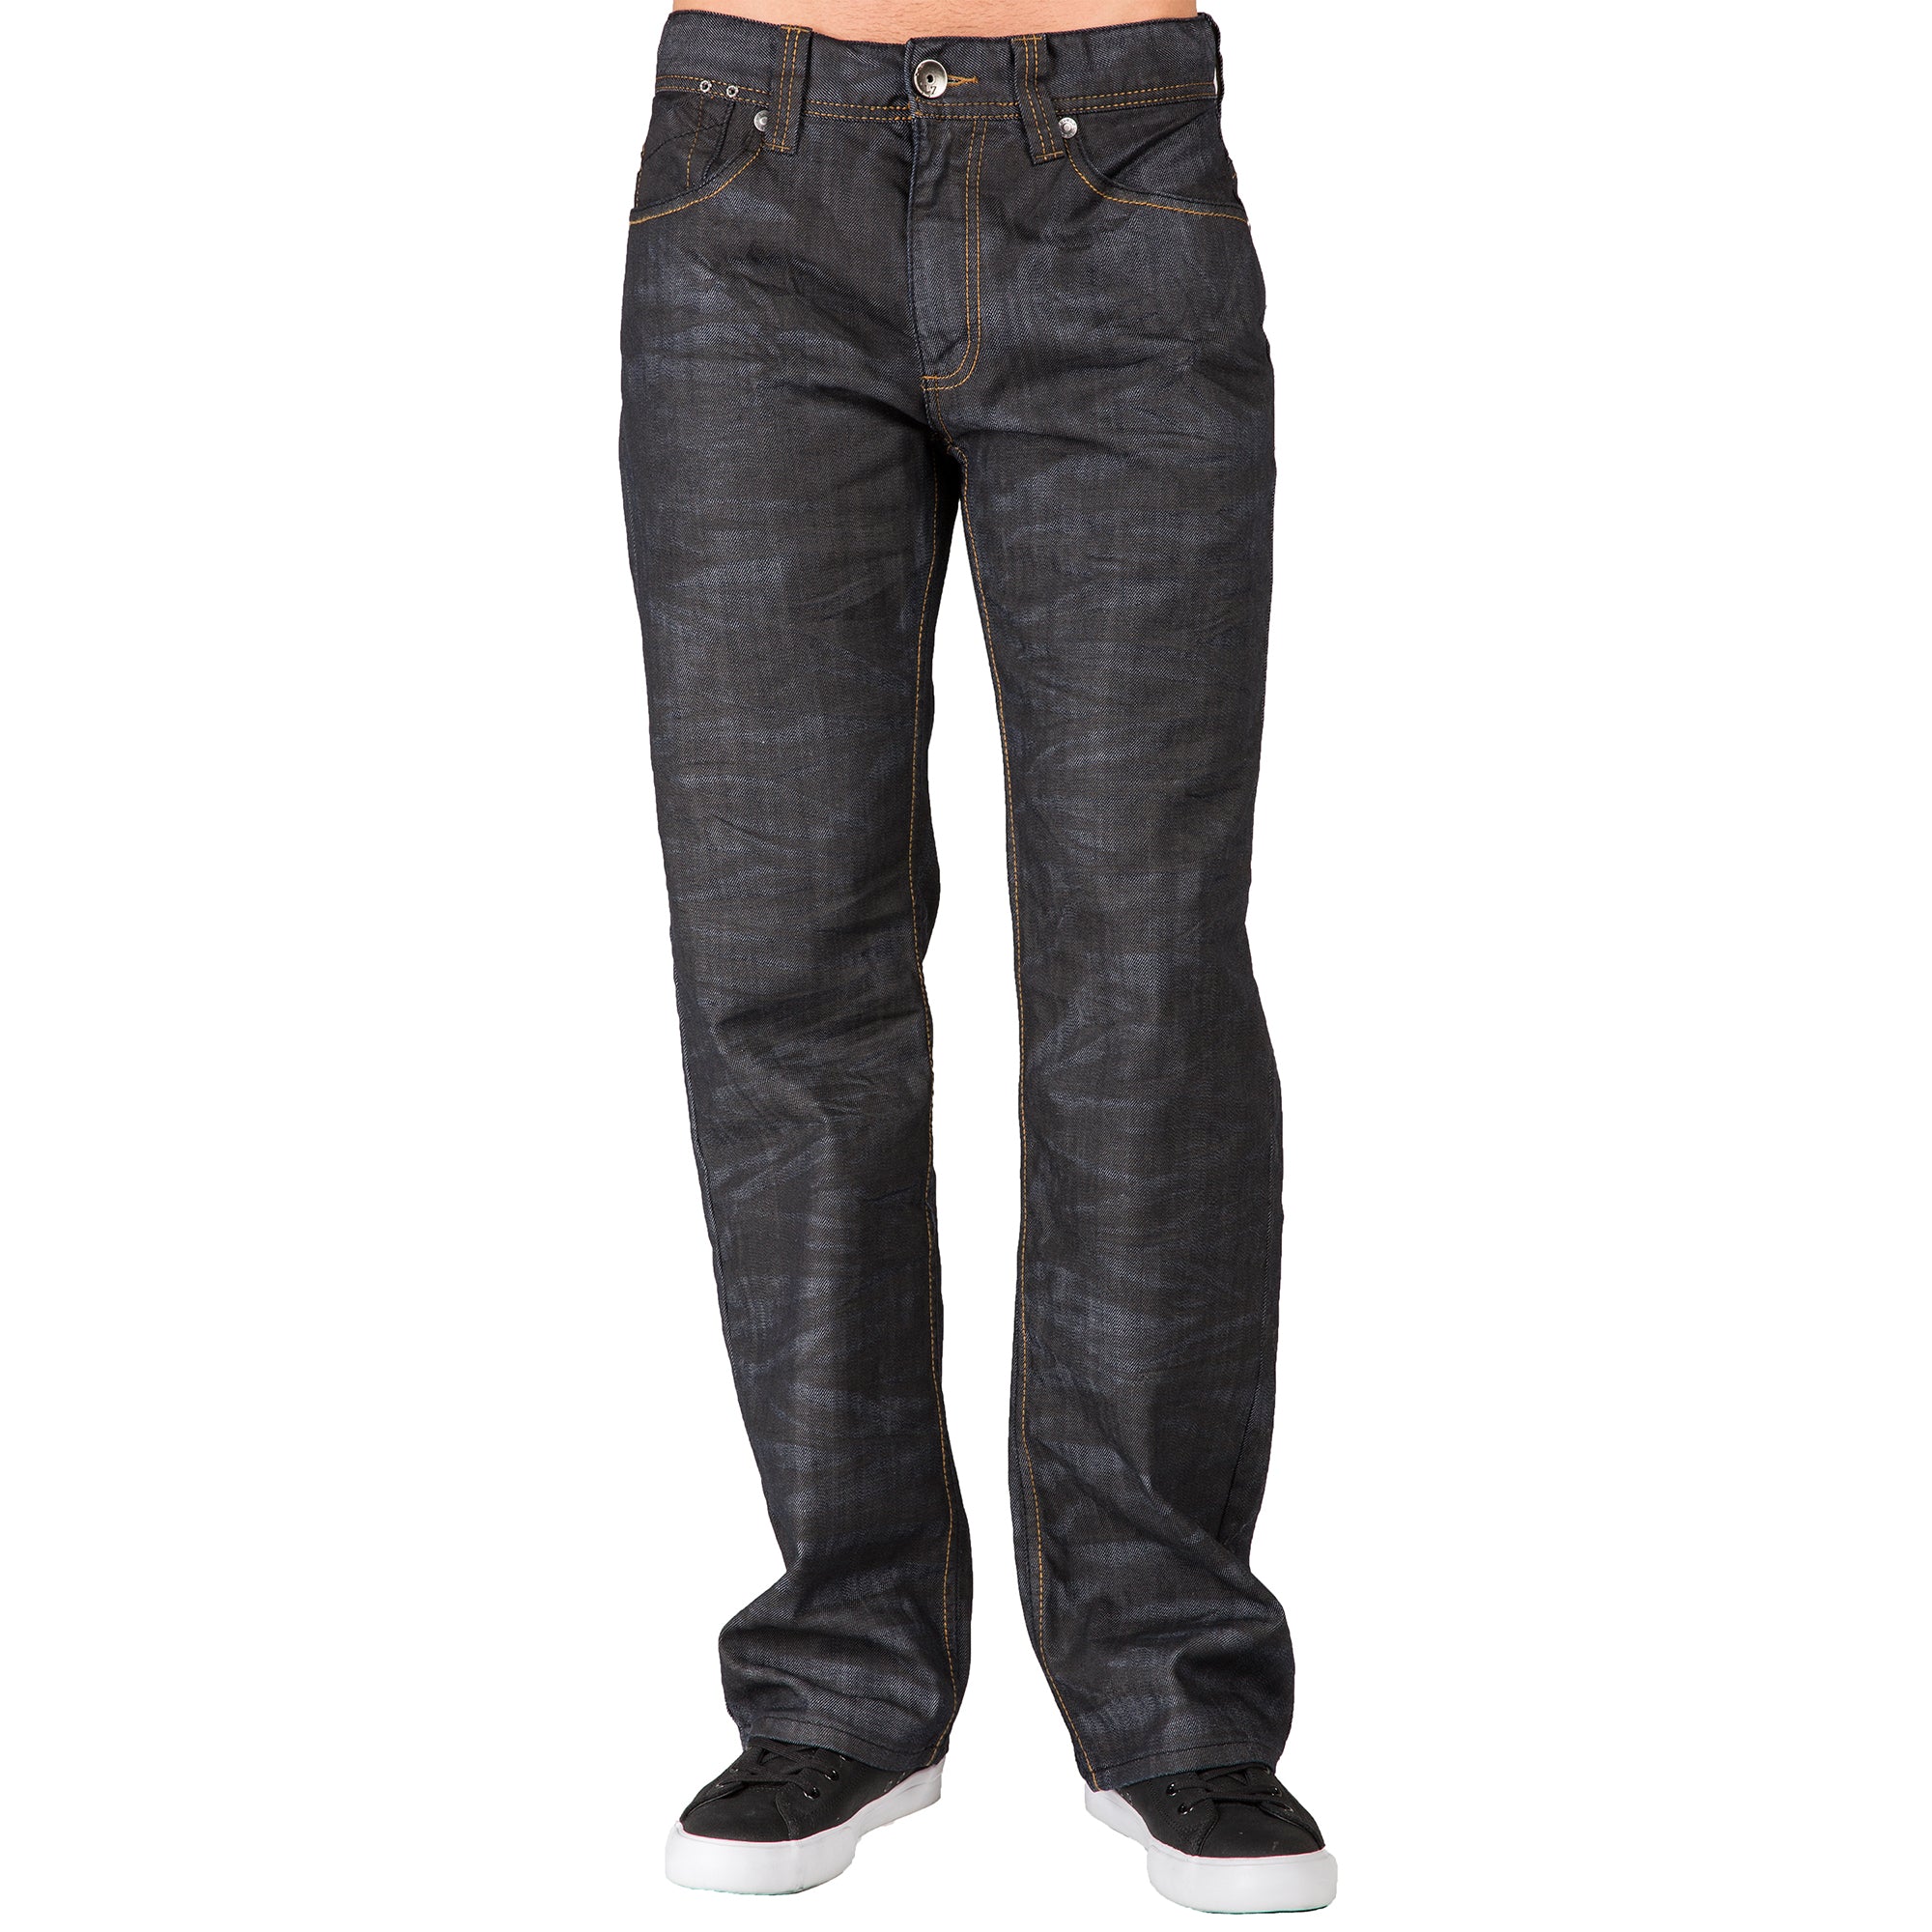 Black Coated Midrise Relaxed Bootcut Premium Denim 5 Pocket Jeans Overspray Wash